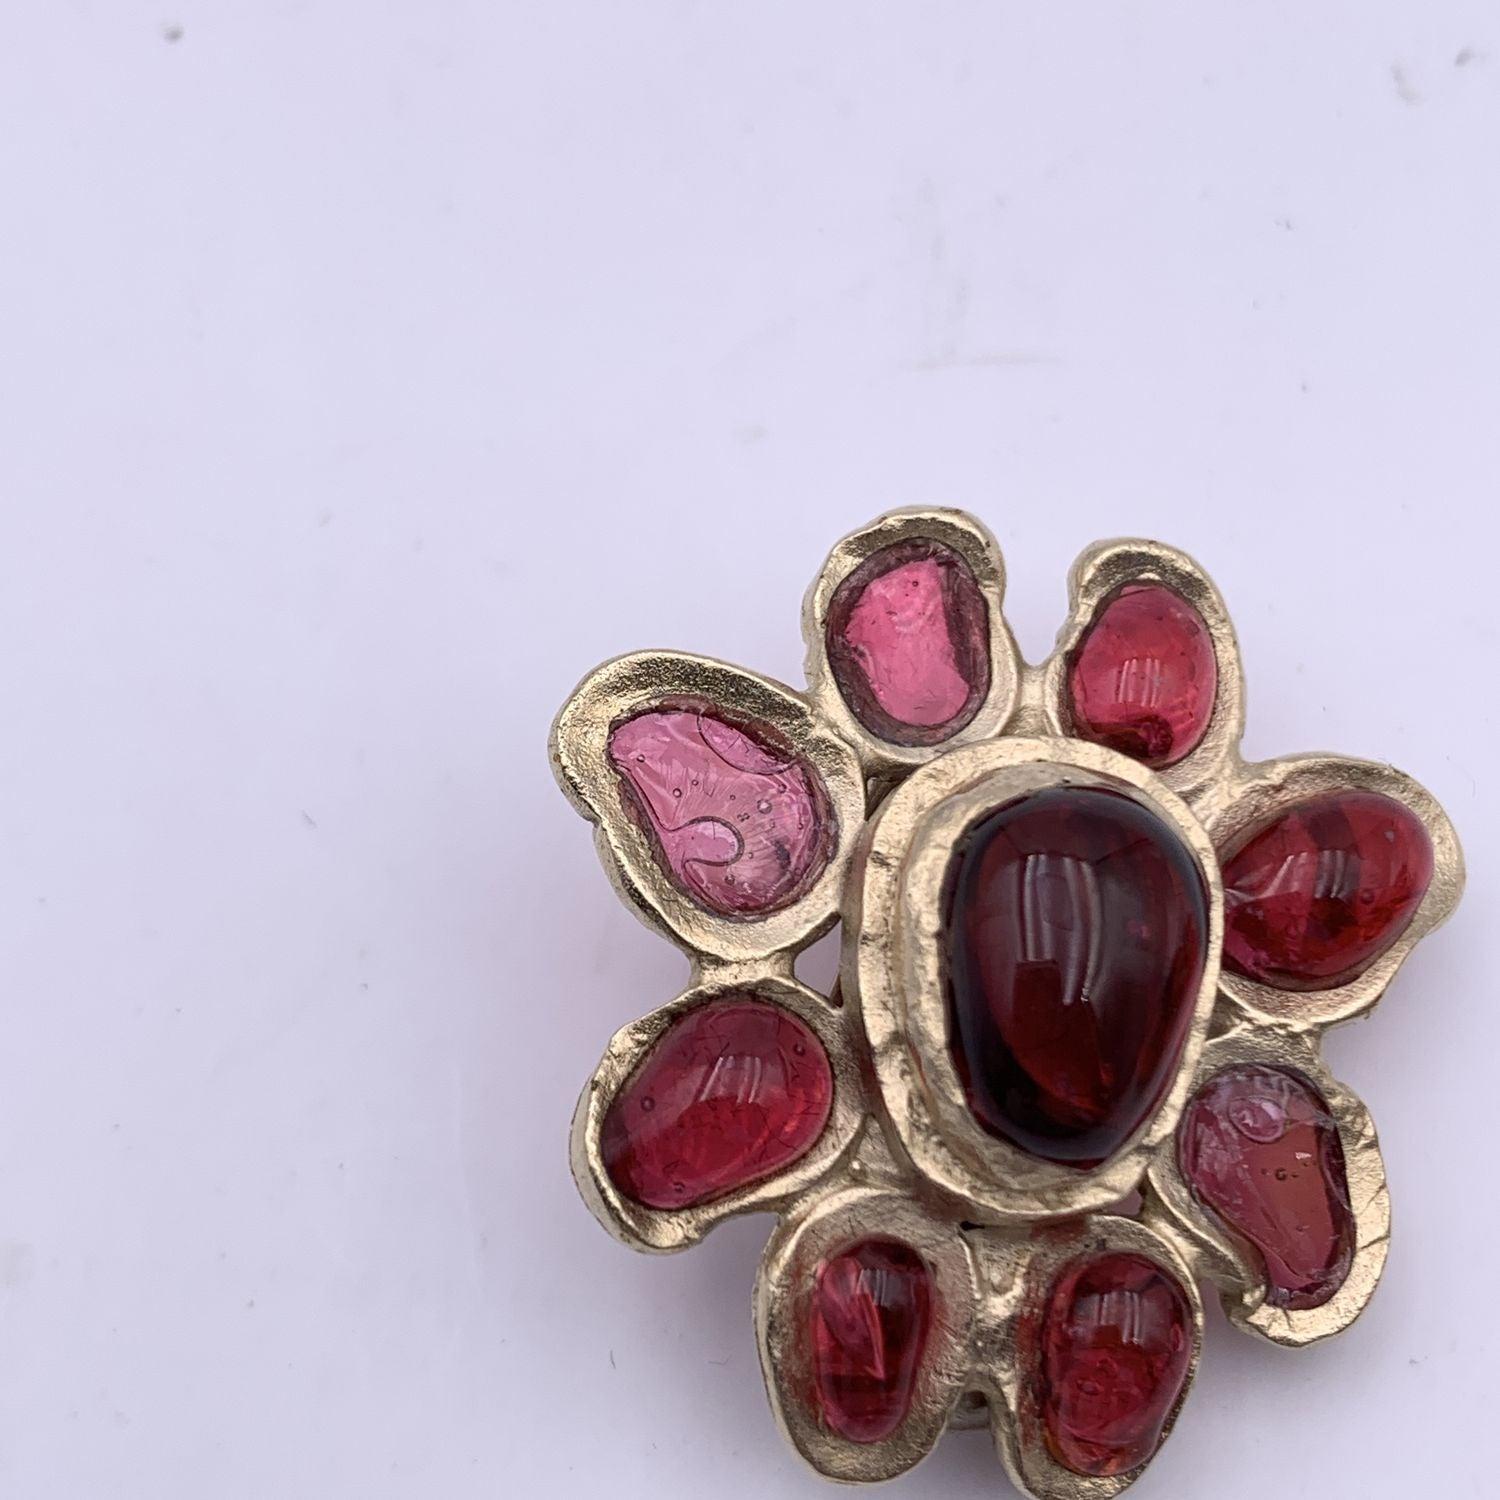 Beautiful flower earrings by CHANEL. They are finely crafted in gold metal with red glass cabochon. Small CC logo on a petal. 'CHANEL - 07 CC A- Made in France' oval tag on the reverse of the earring. Diameter: 2.2 cm Condition B - VERY GOOD Two